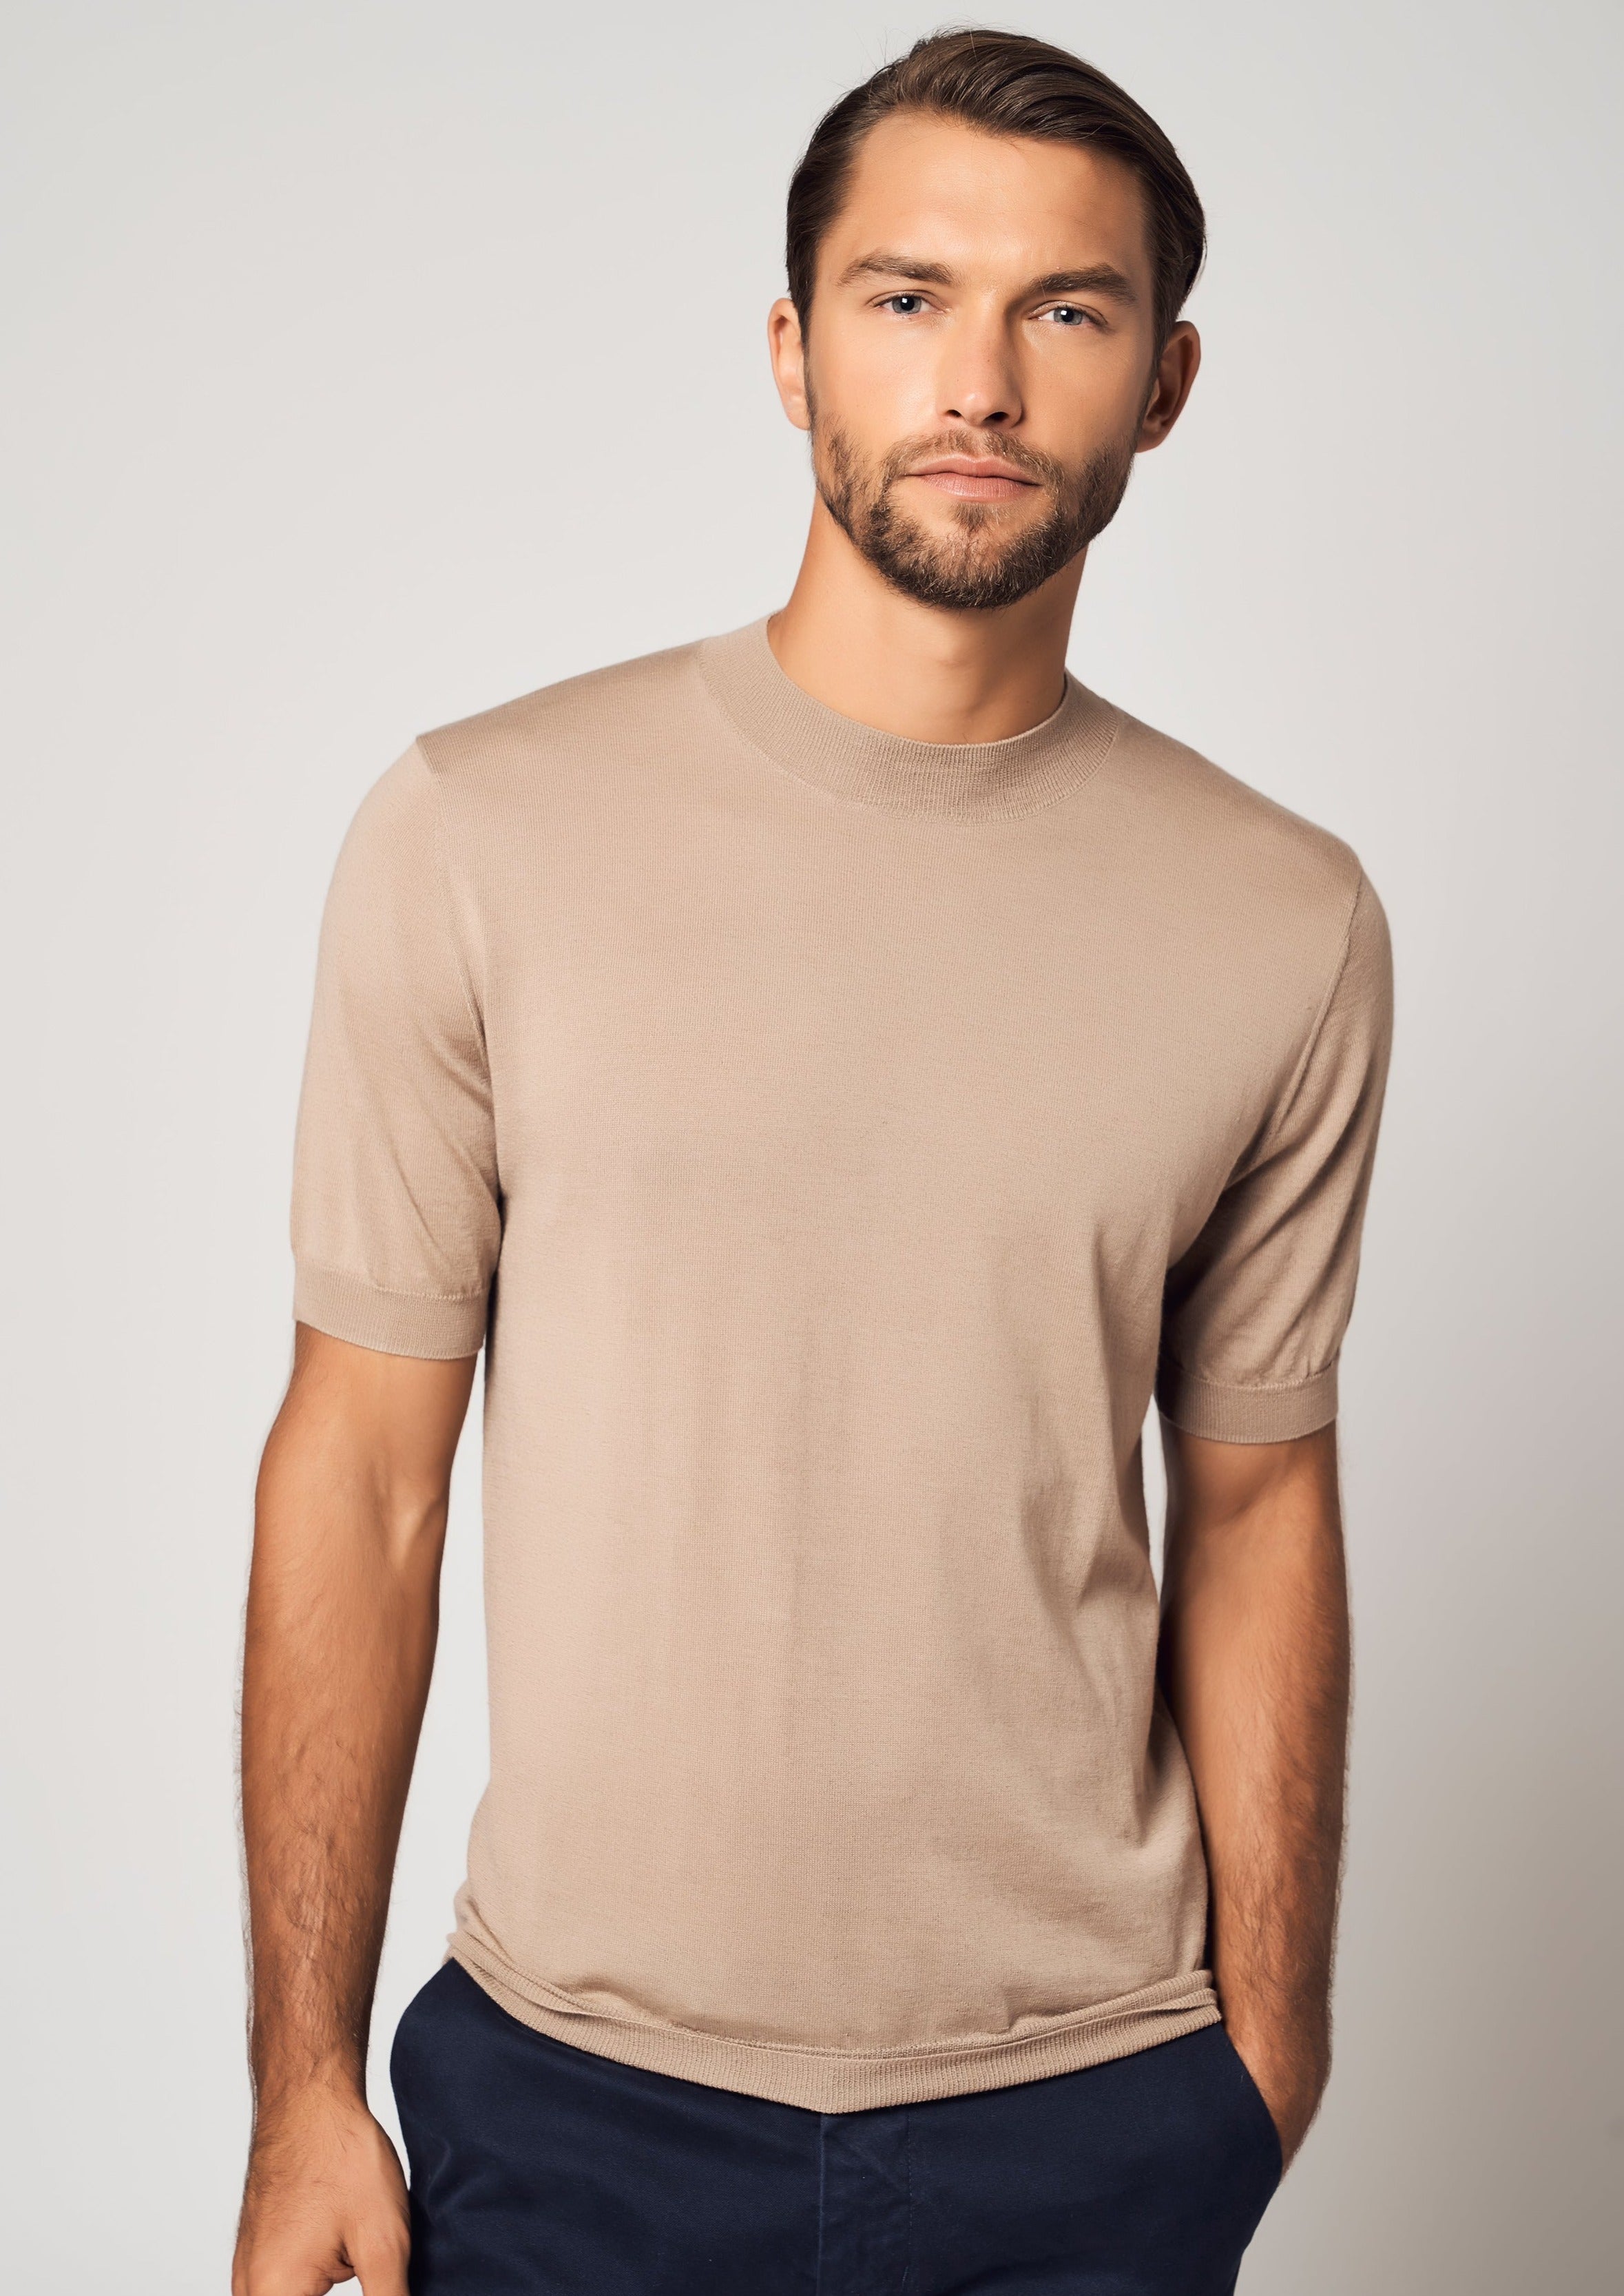 Silk Cashmere High Neck Short Sleeve Tee | Sand | Bellemere New York | 100% Cashmere Sustainable